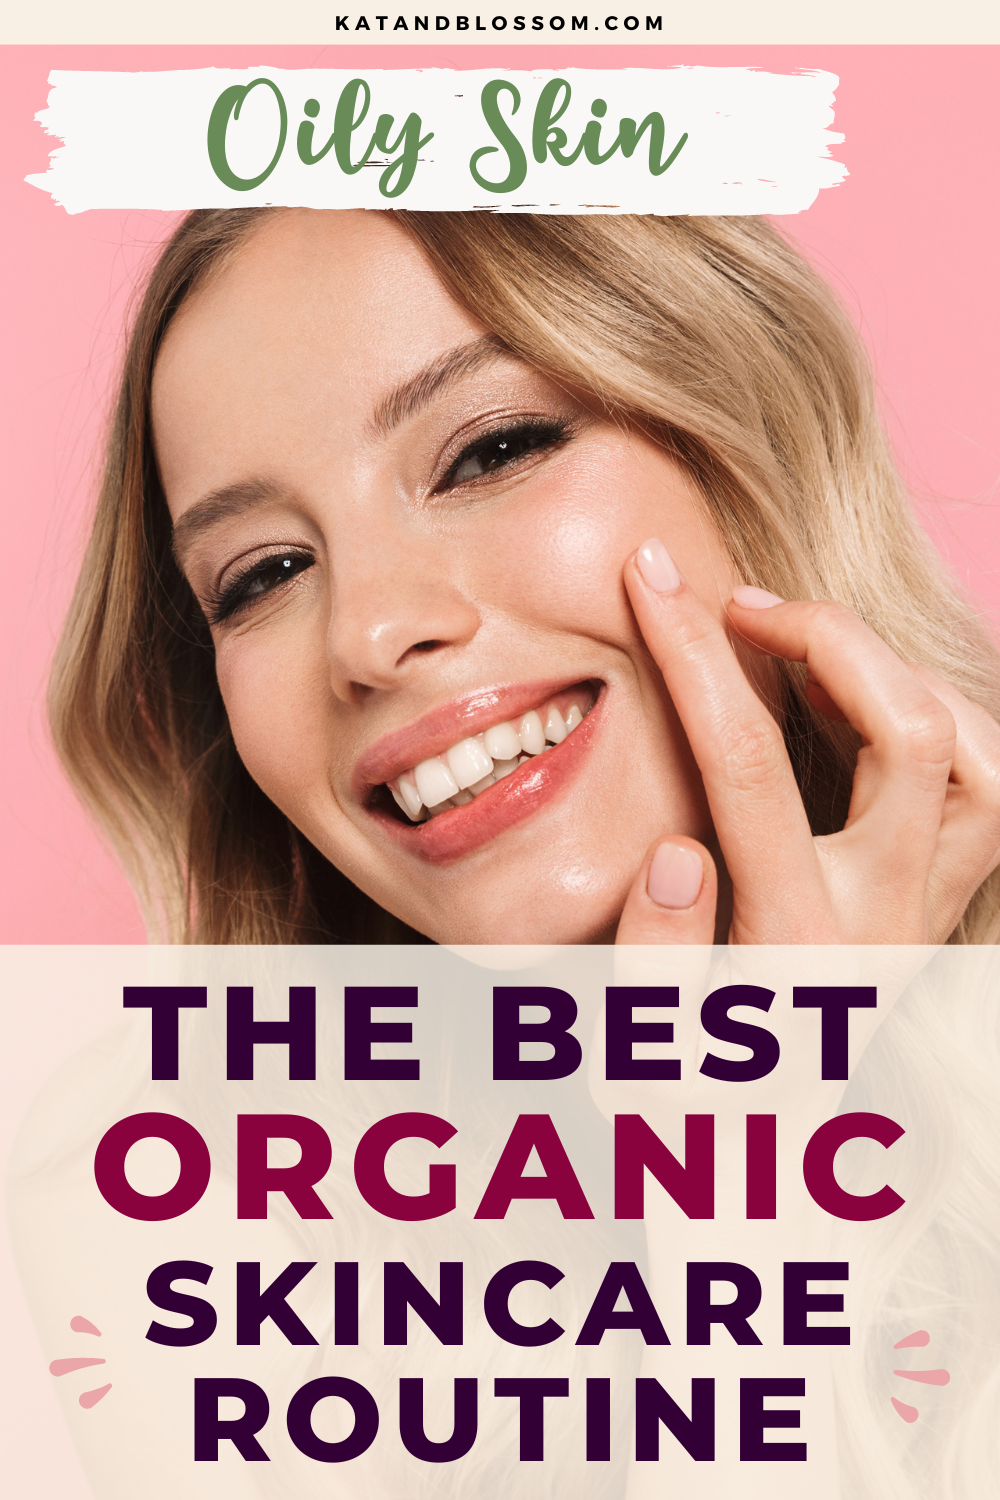 The Best Organic Spring Skincare Routine for Oily Skin Pinterest Cover